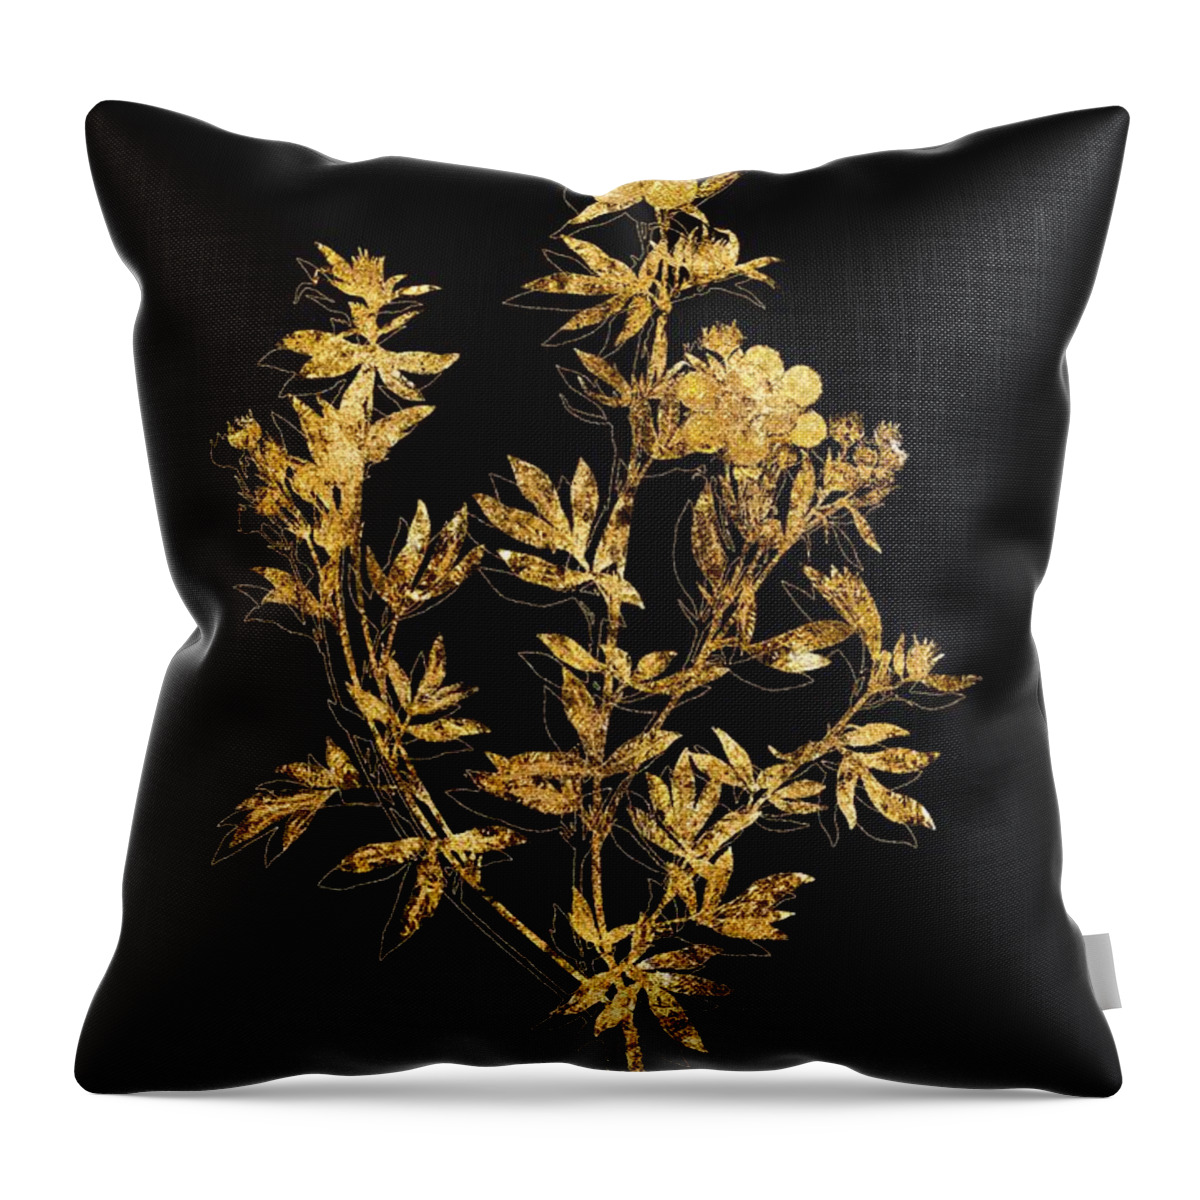 Vintage Throw Pillow featuring the mixed media Gold Yellow Buttercup Flowers Botanical Illustration on Black by Holy Rock Design